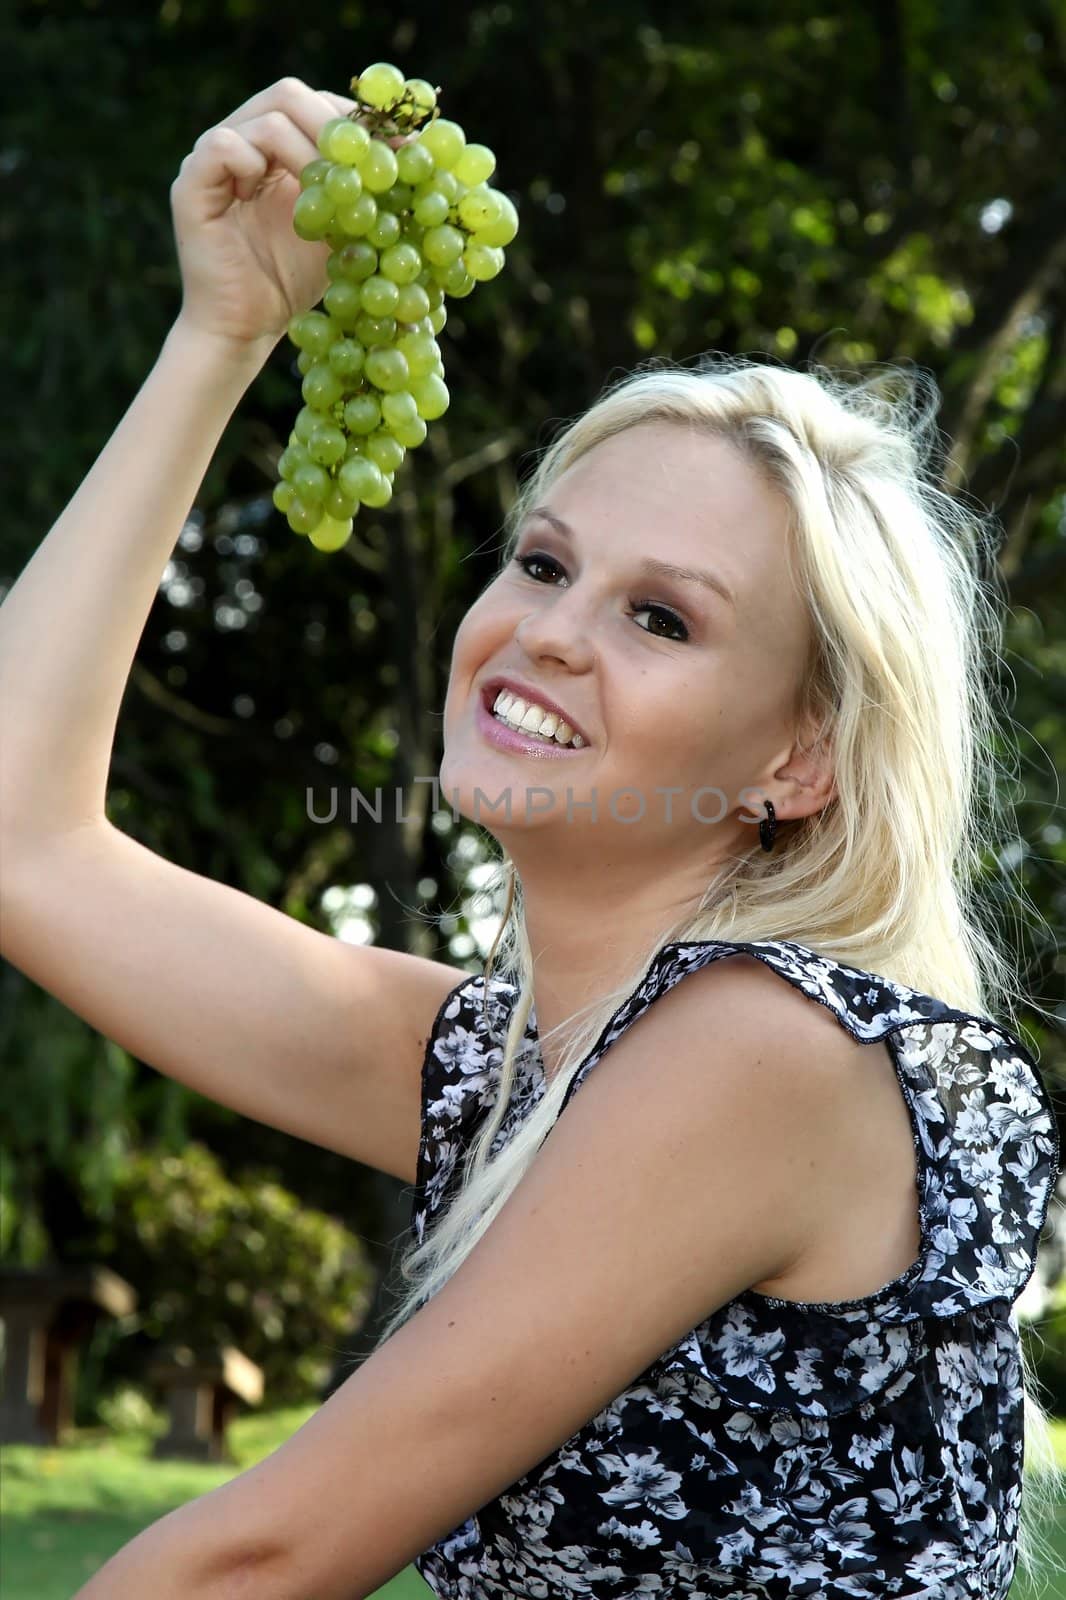 Beautiful Blonde Woman and Grapes by fouroaks